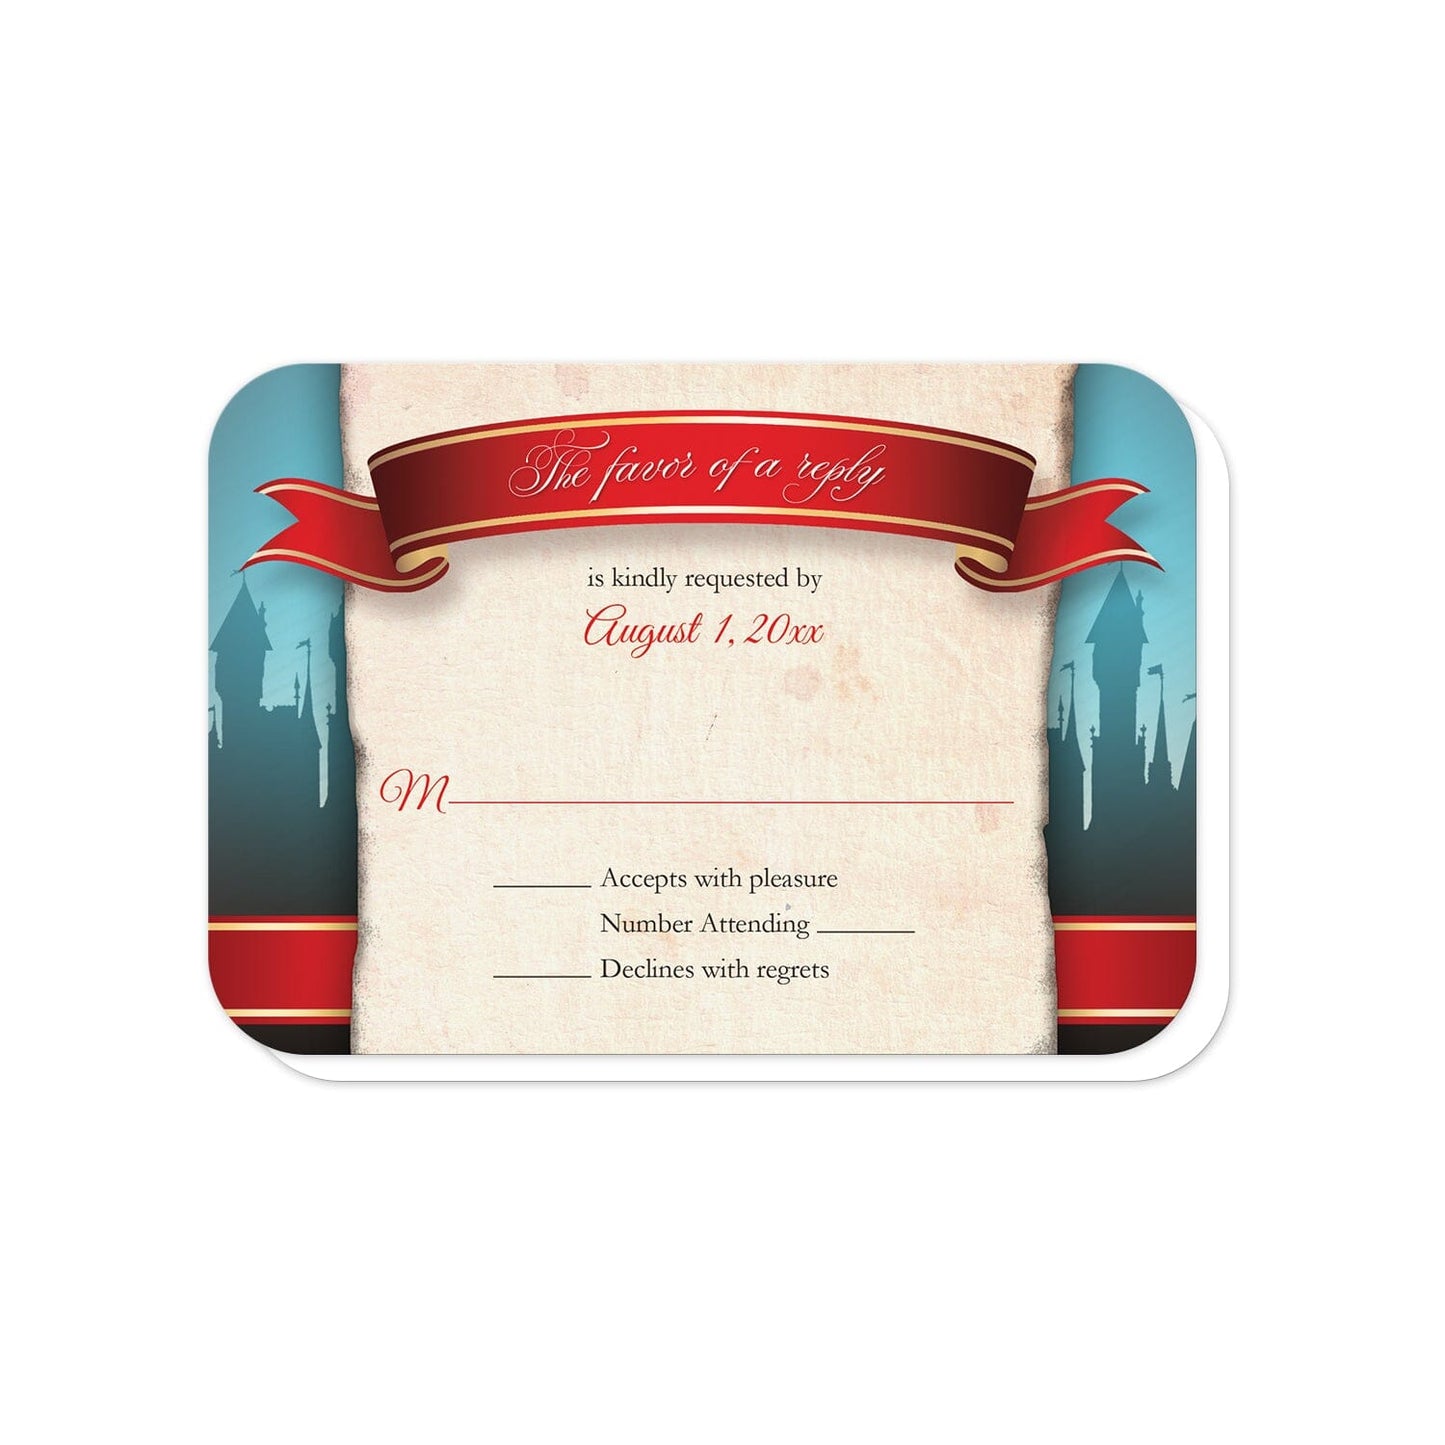 Fairytale Castle Red Once Upon a Time RSVP Cards (with rounded corners) at Artistically Invited.